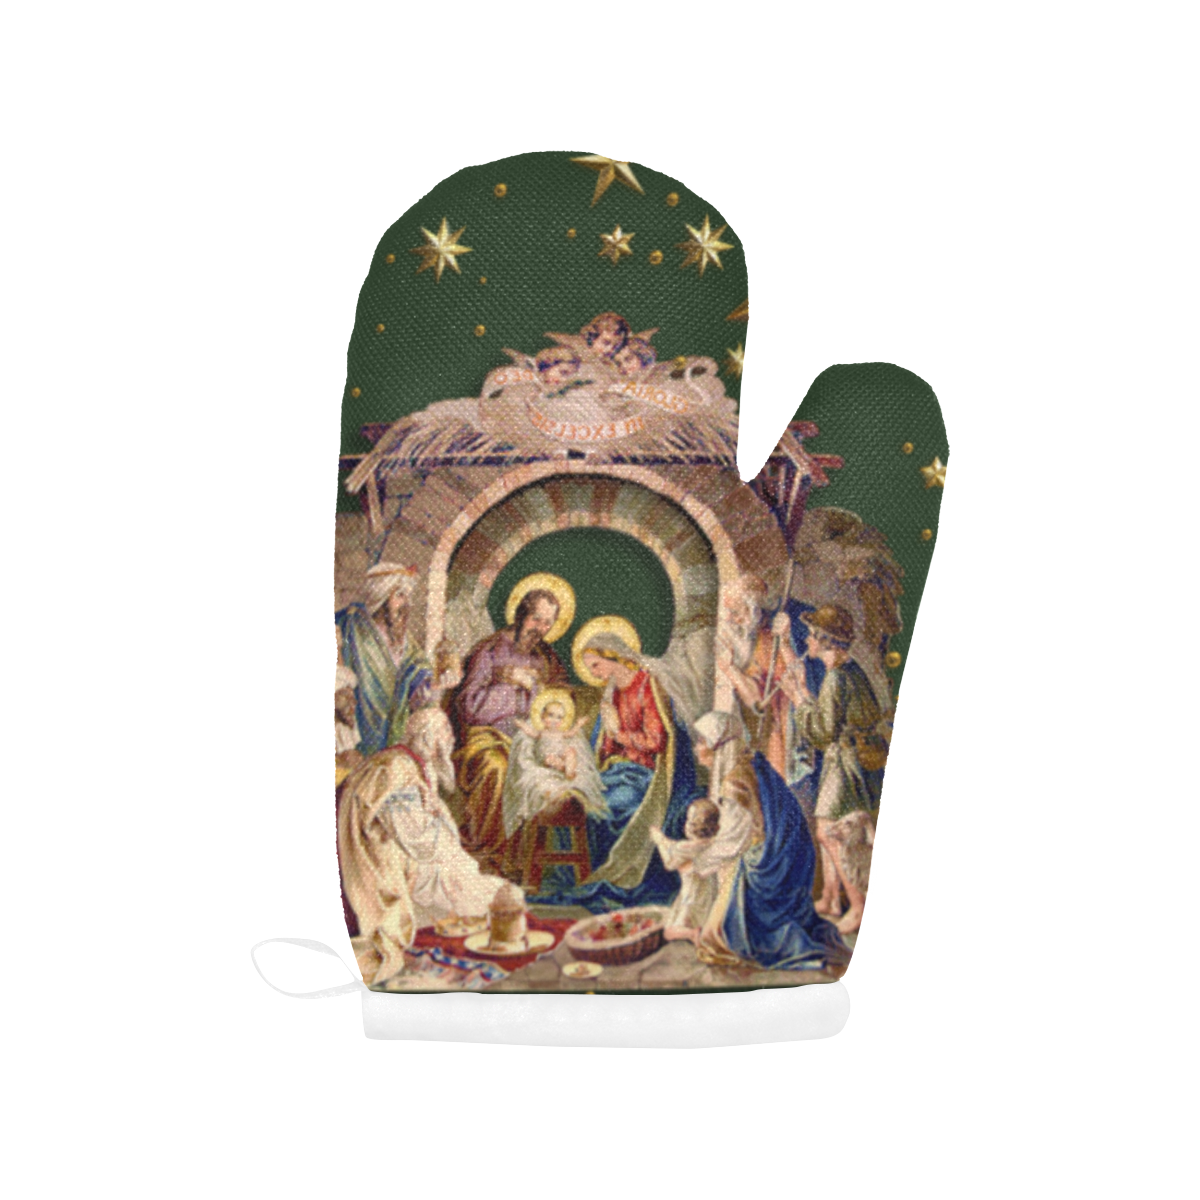 Nativity Oven Mittens Forrest Green Oven Mitt (Two Pieces)